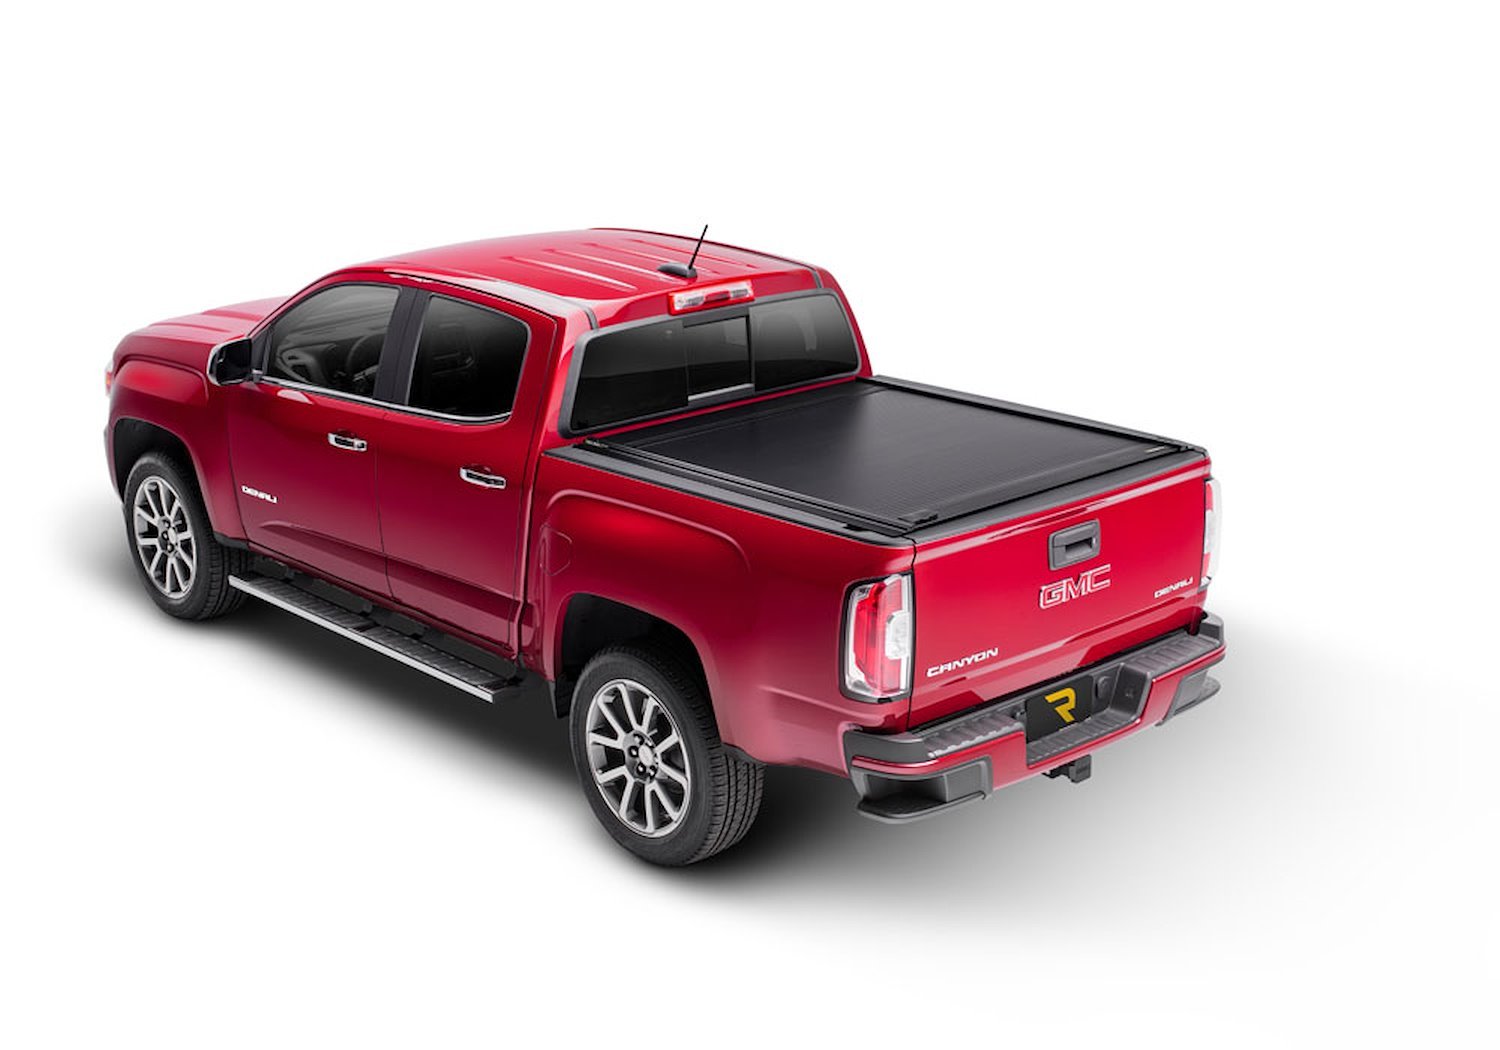 60455 RetraxOne MX Retractable Tonneau Cover Fits Select Chevy Colorado/GMC Canyon 5' 2" Bed without Stake Pockets